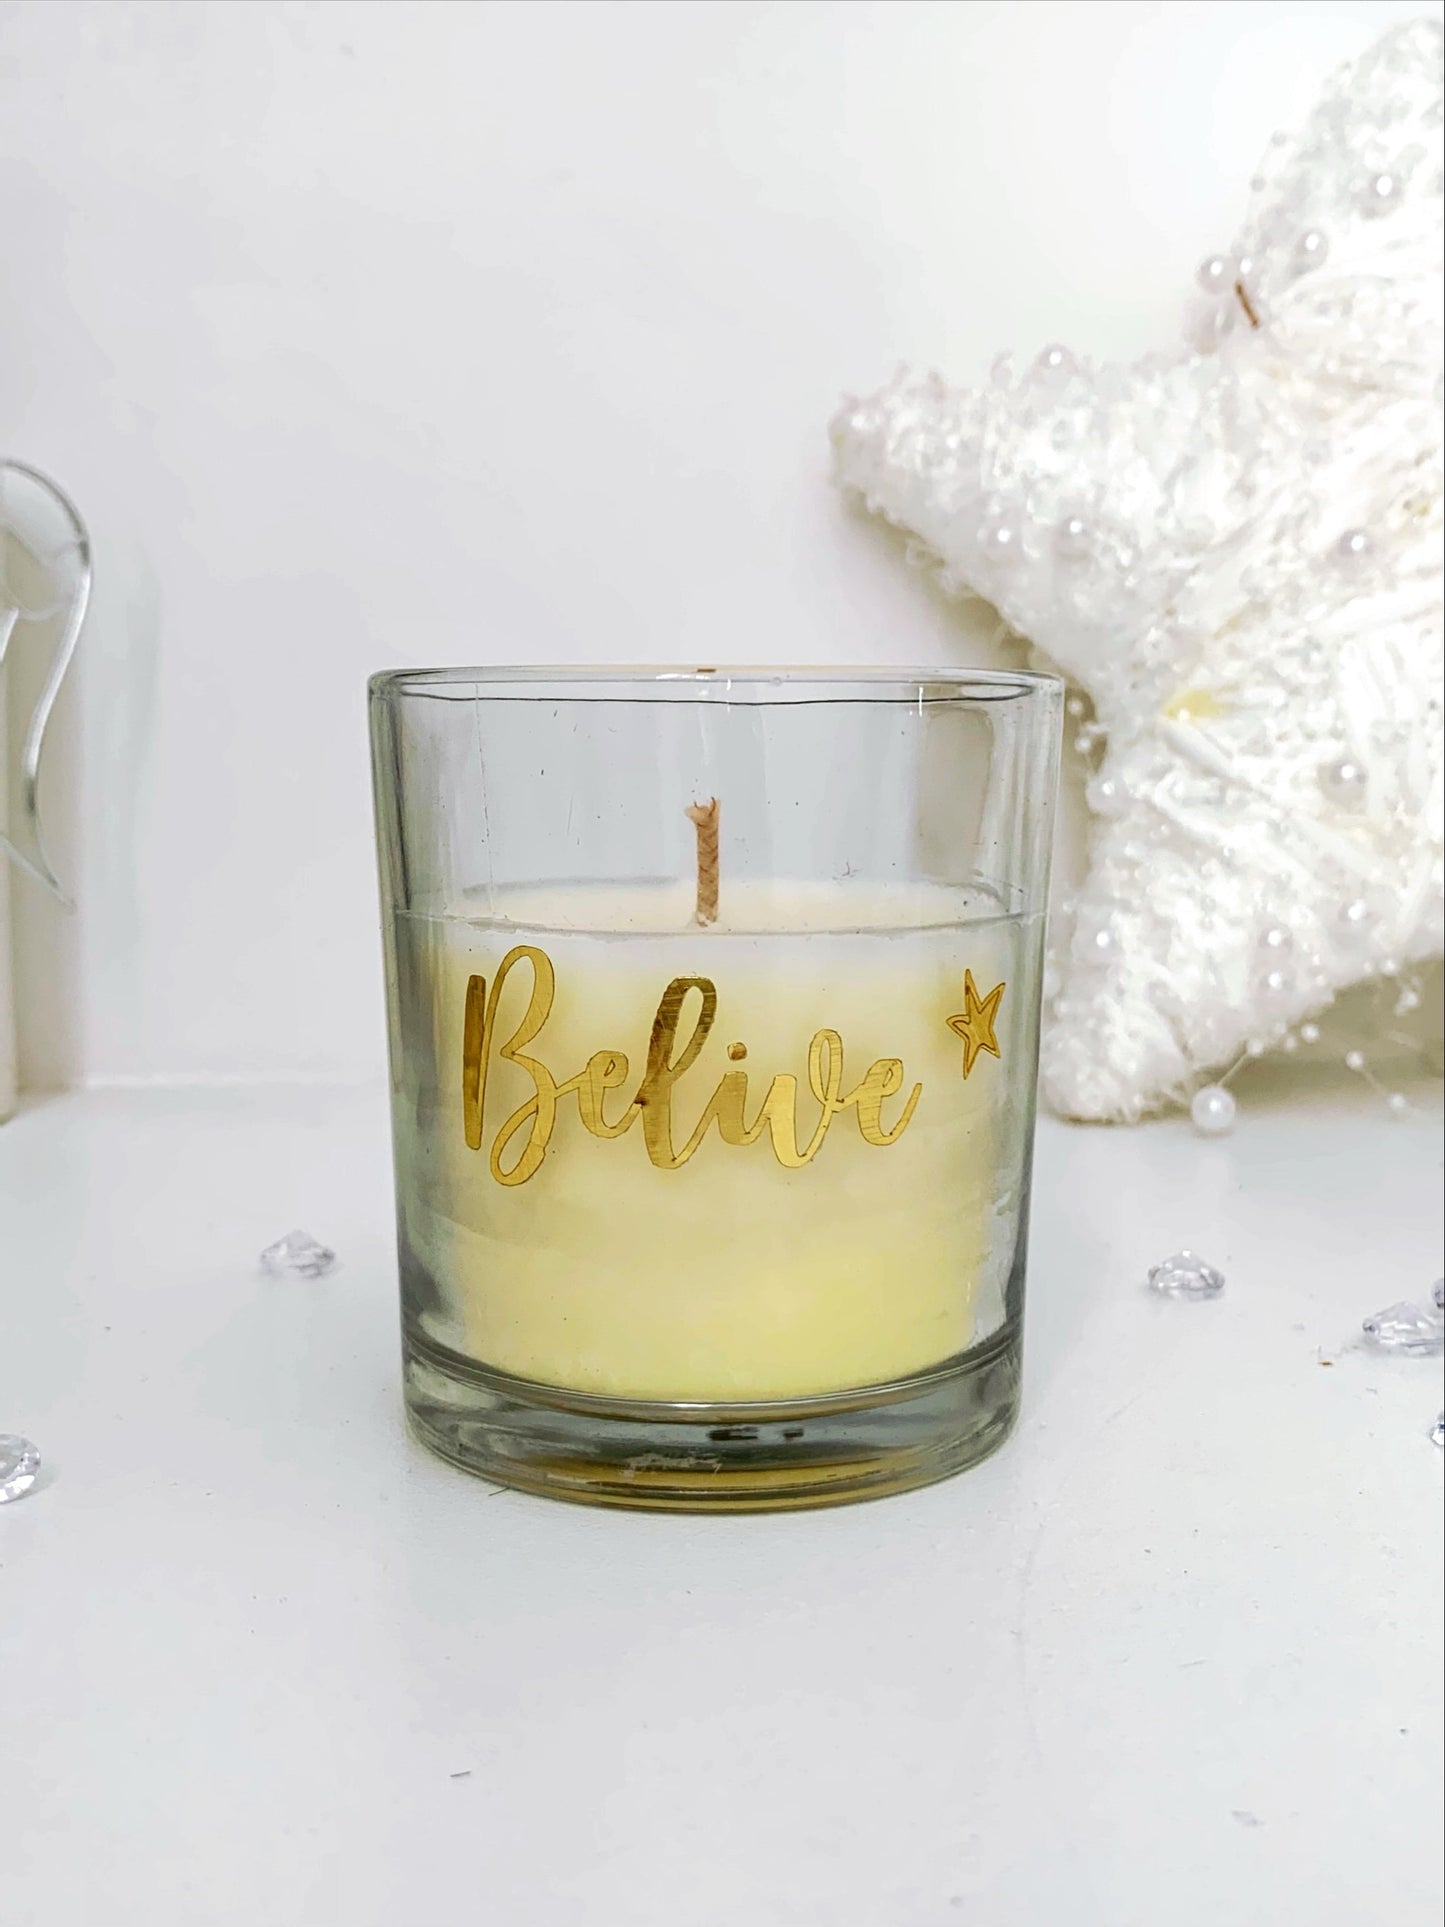 Believe Law of Attraction Candle